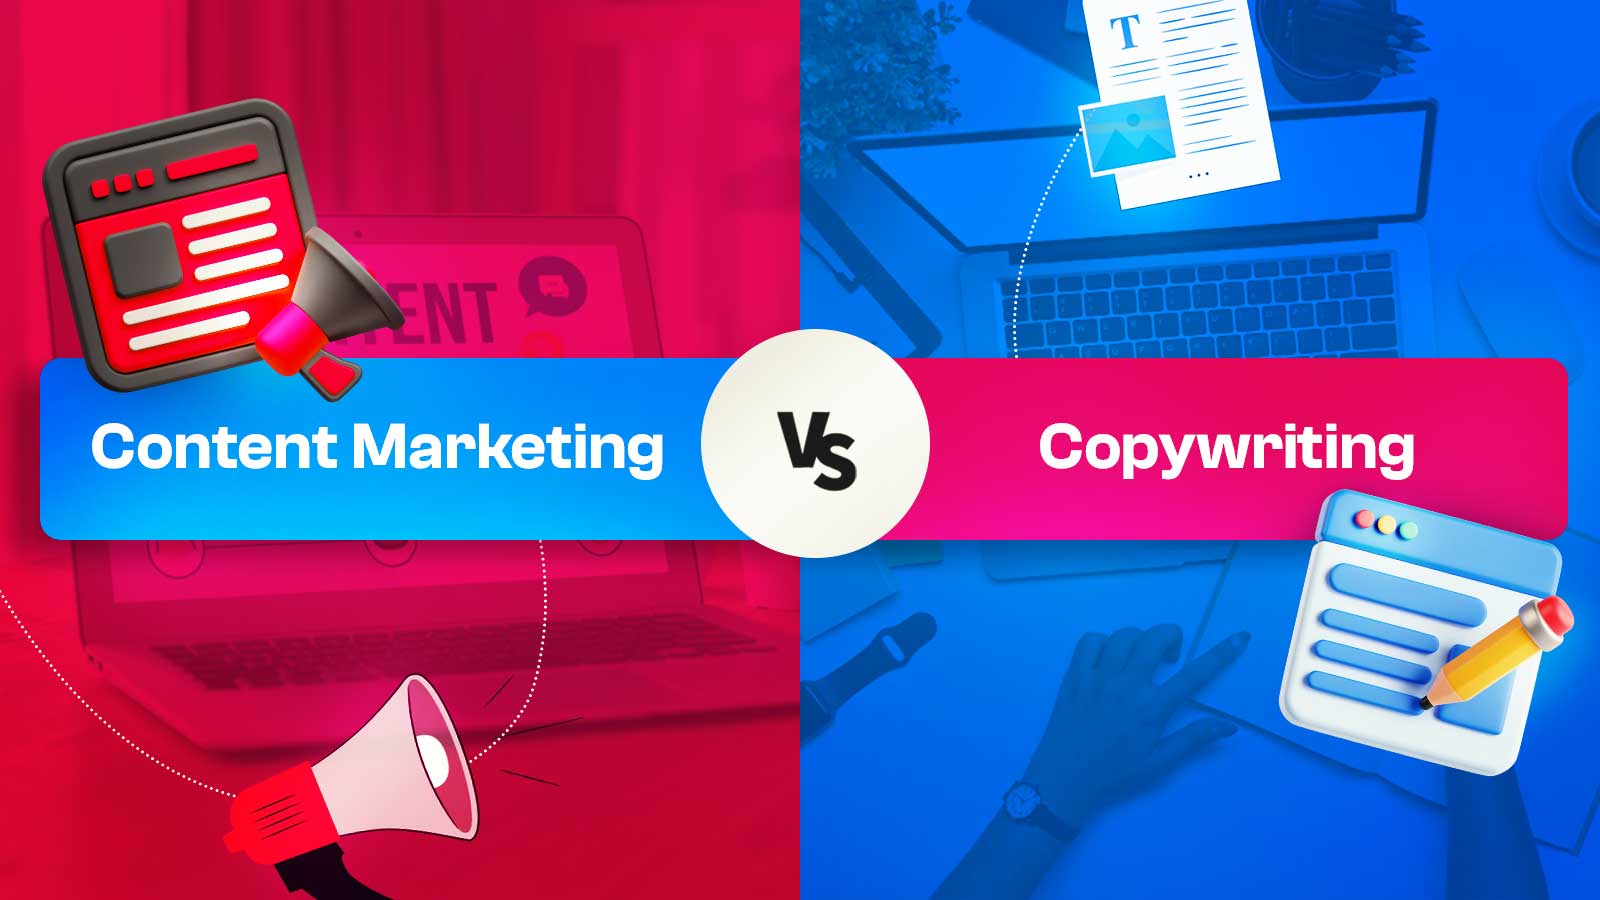 Content Marketing Vs Copywriting: Are They Same Or Different?